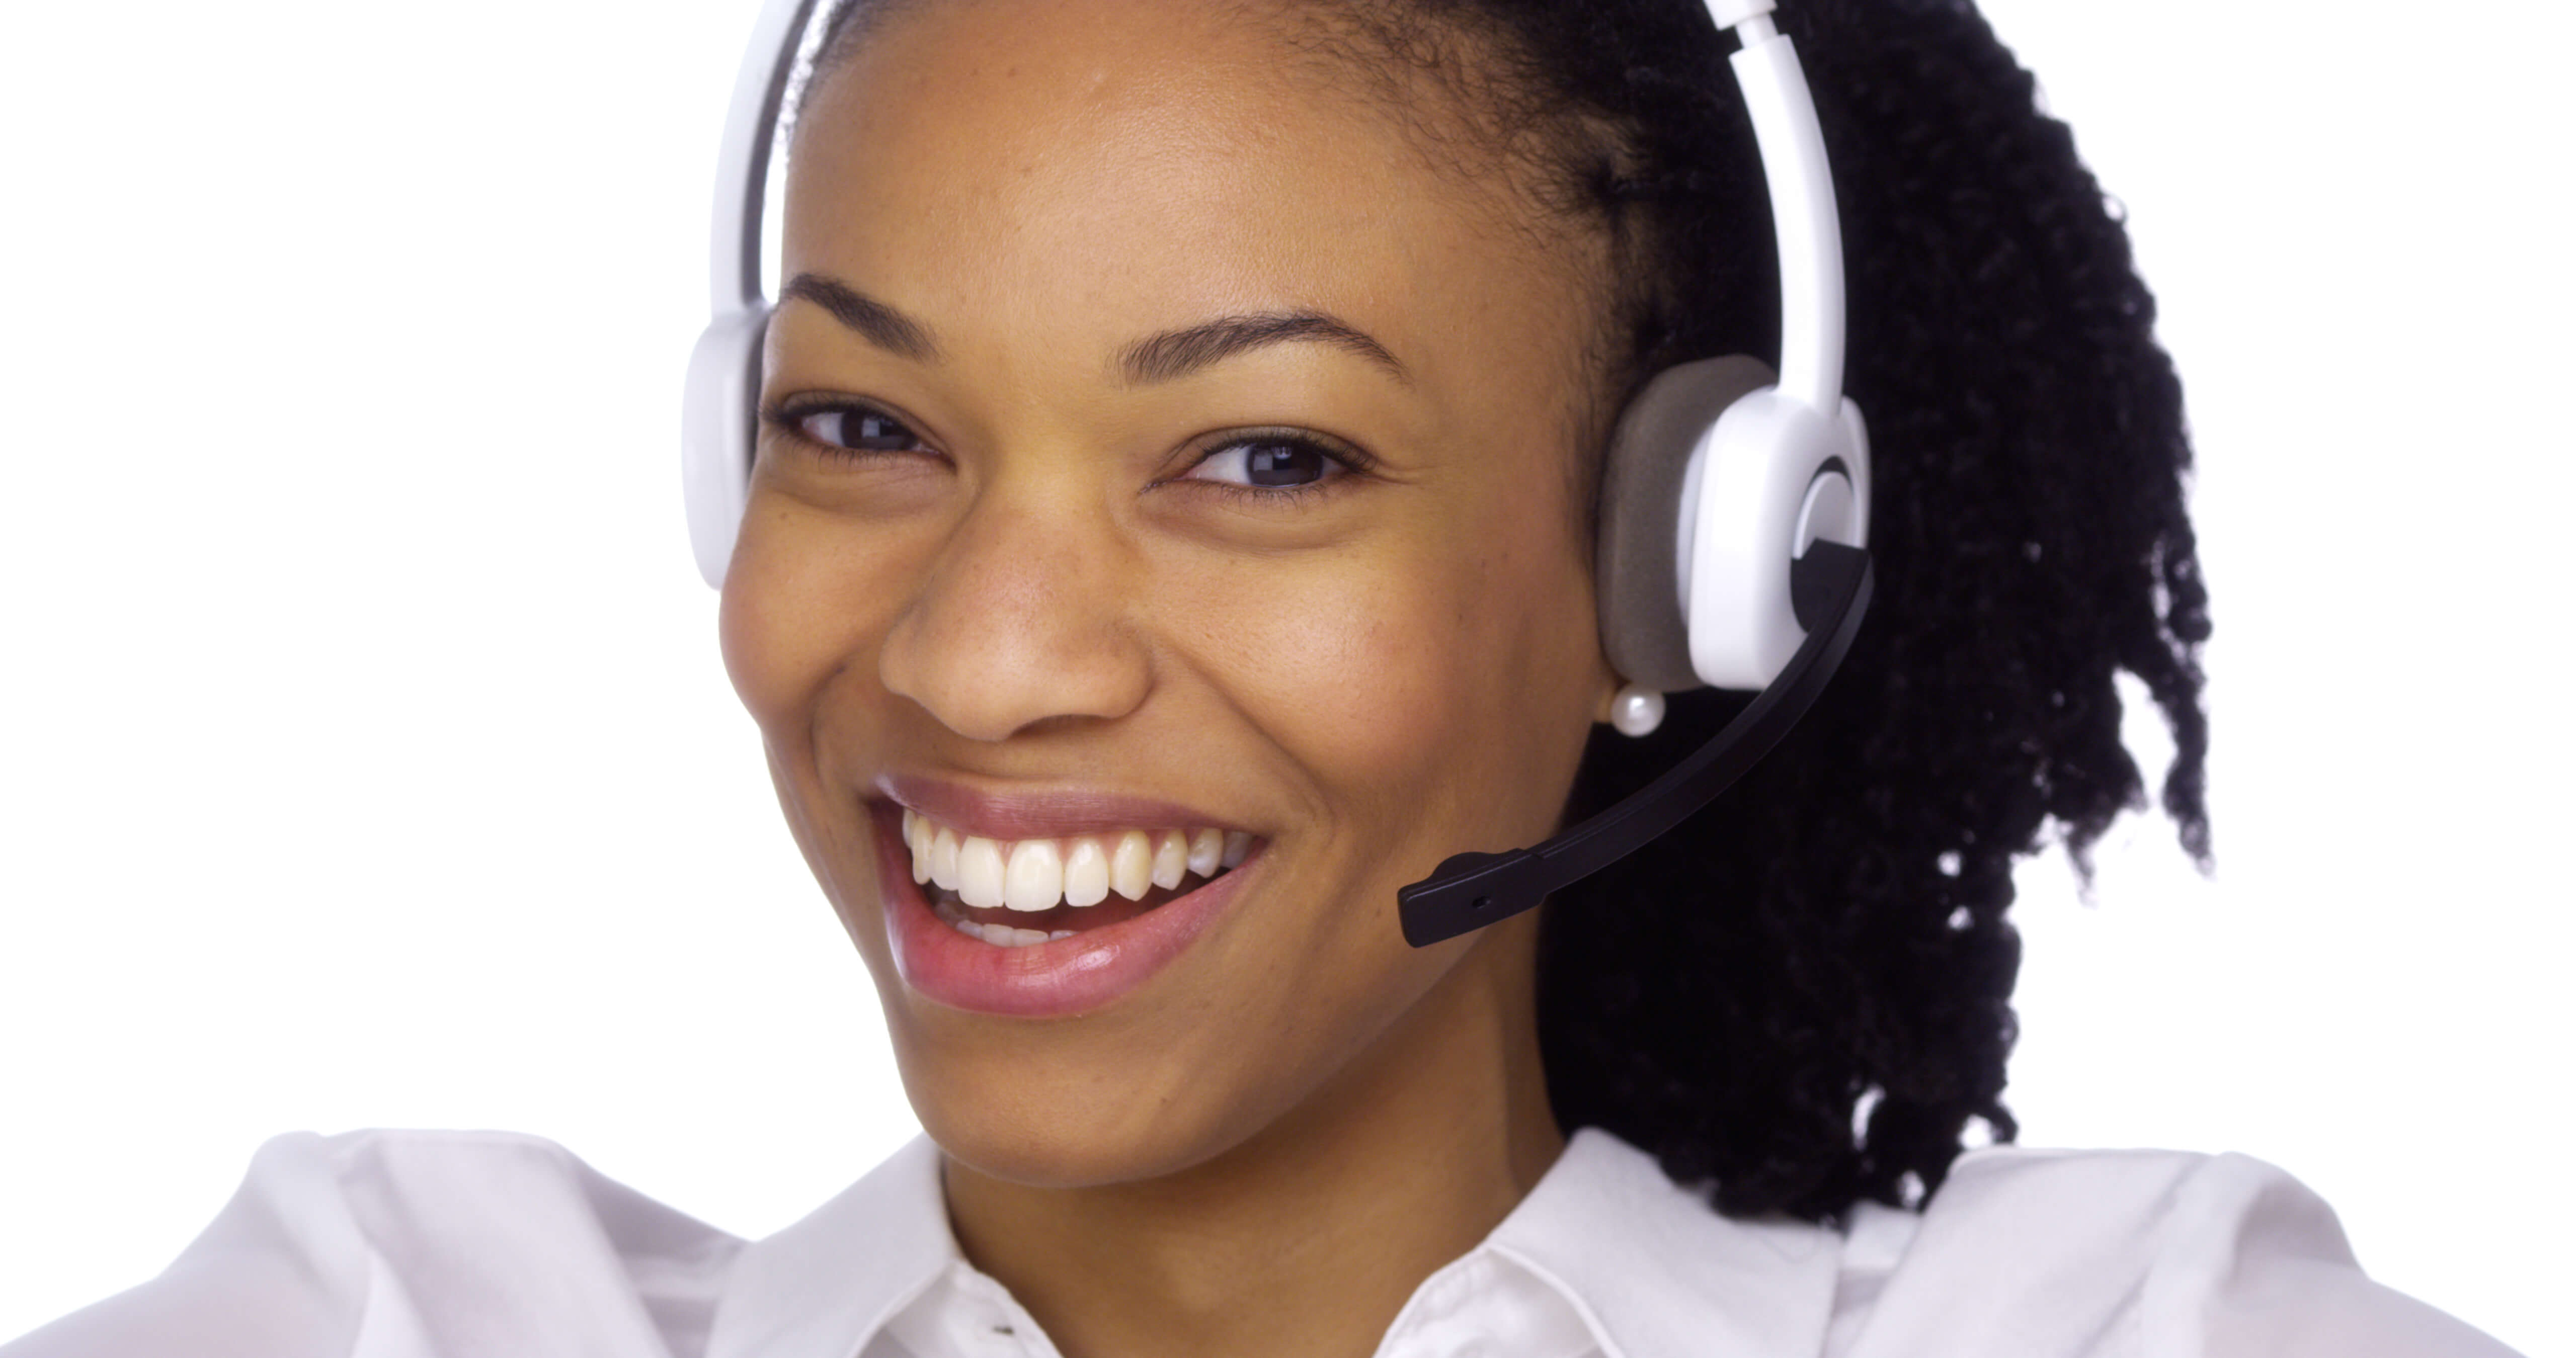 Customer Service staff: How they make a difference